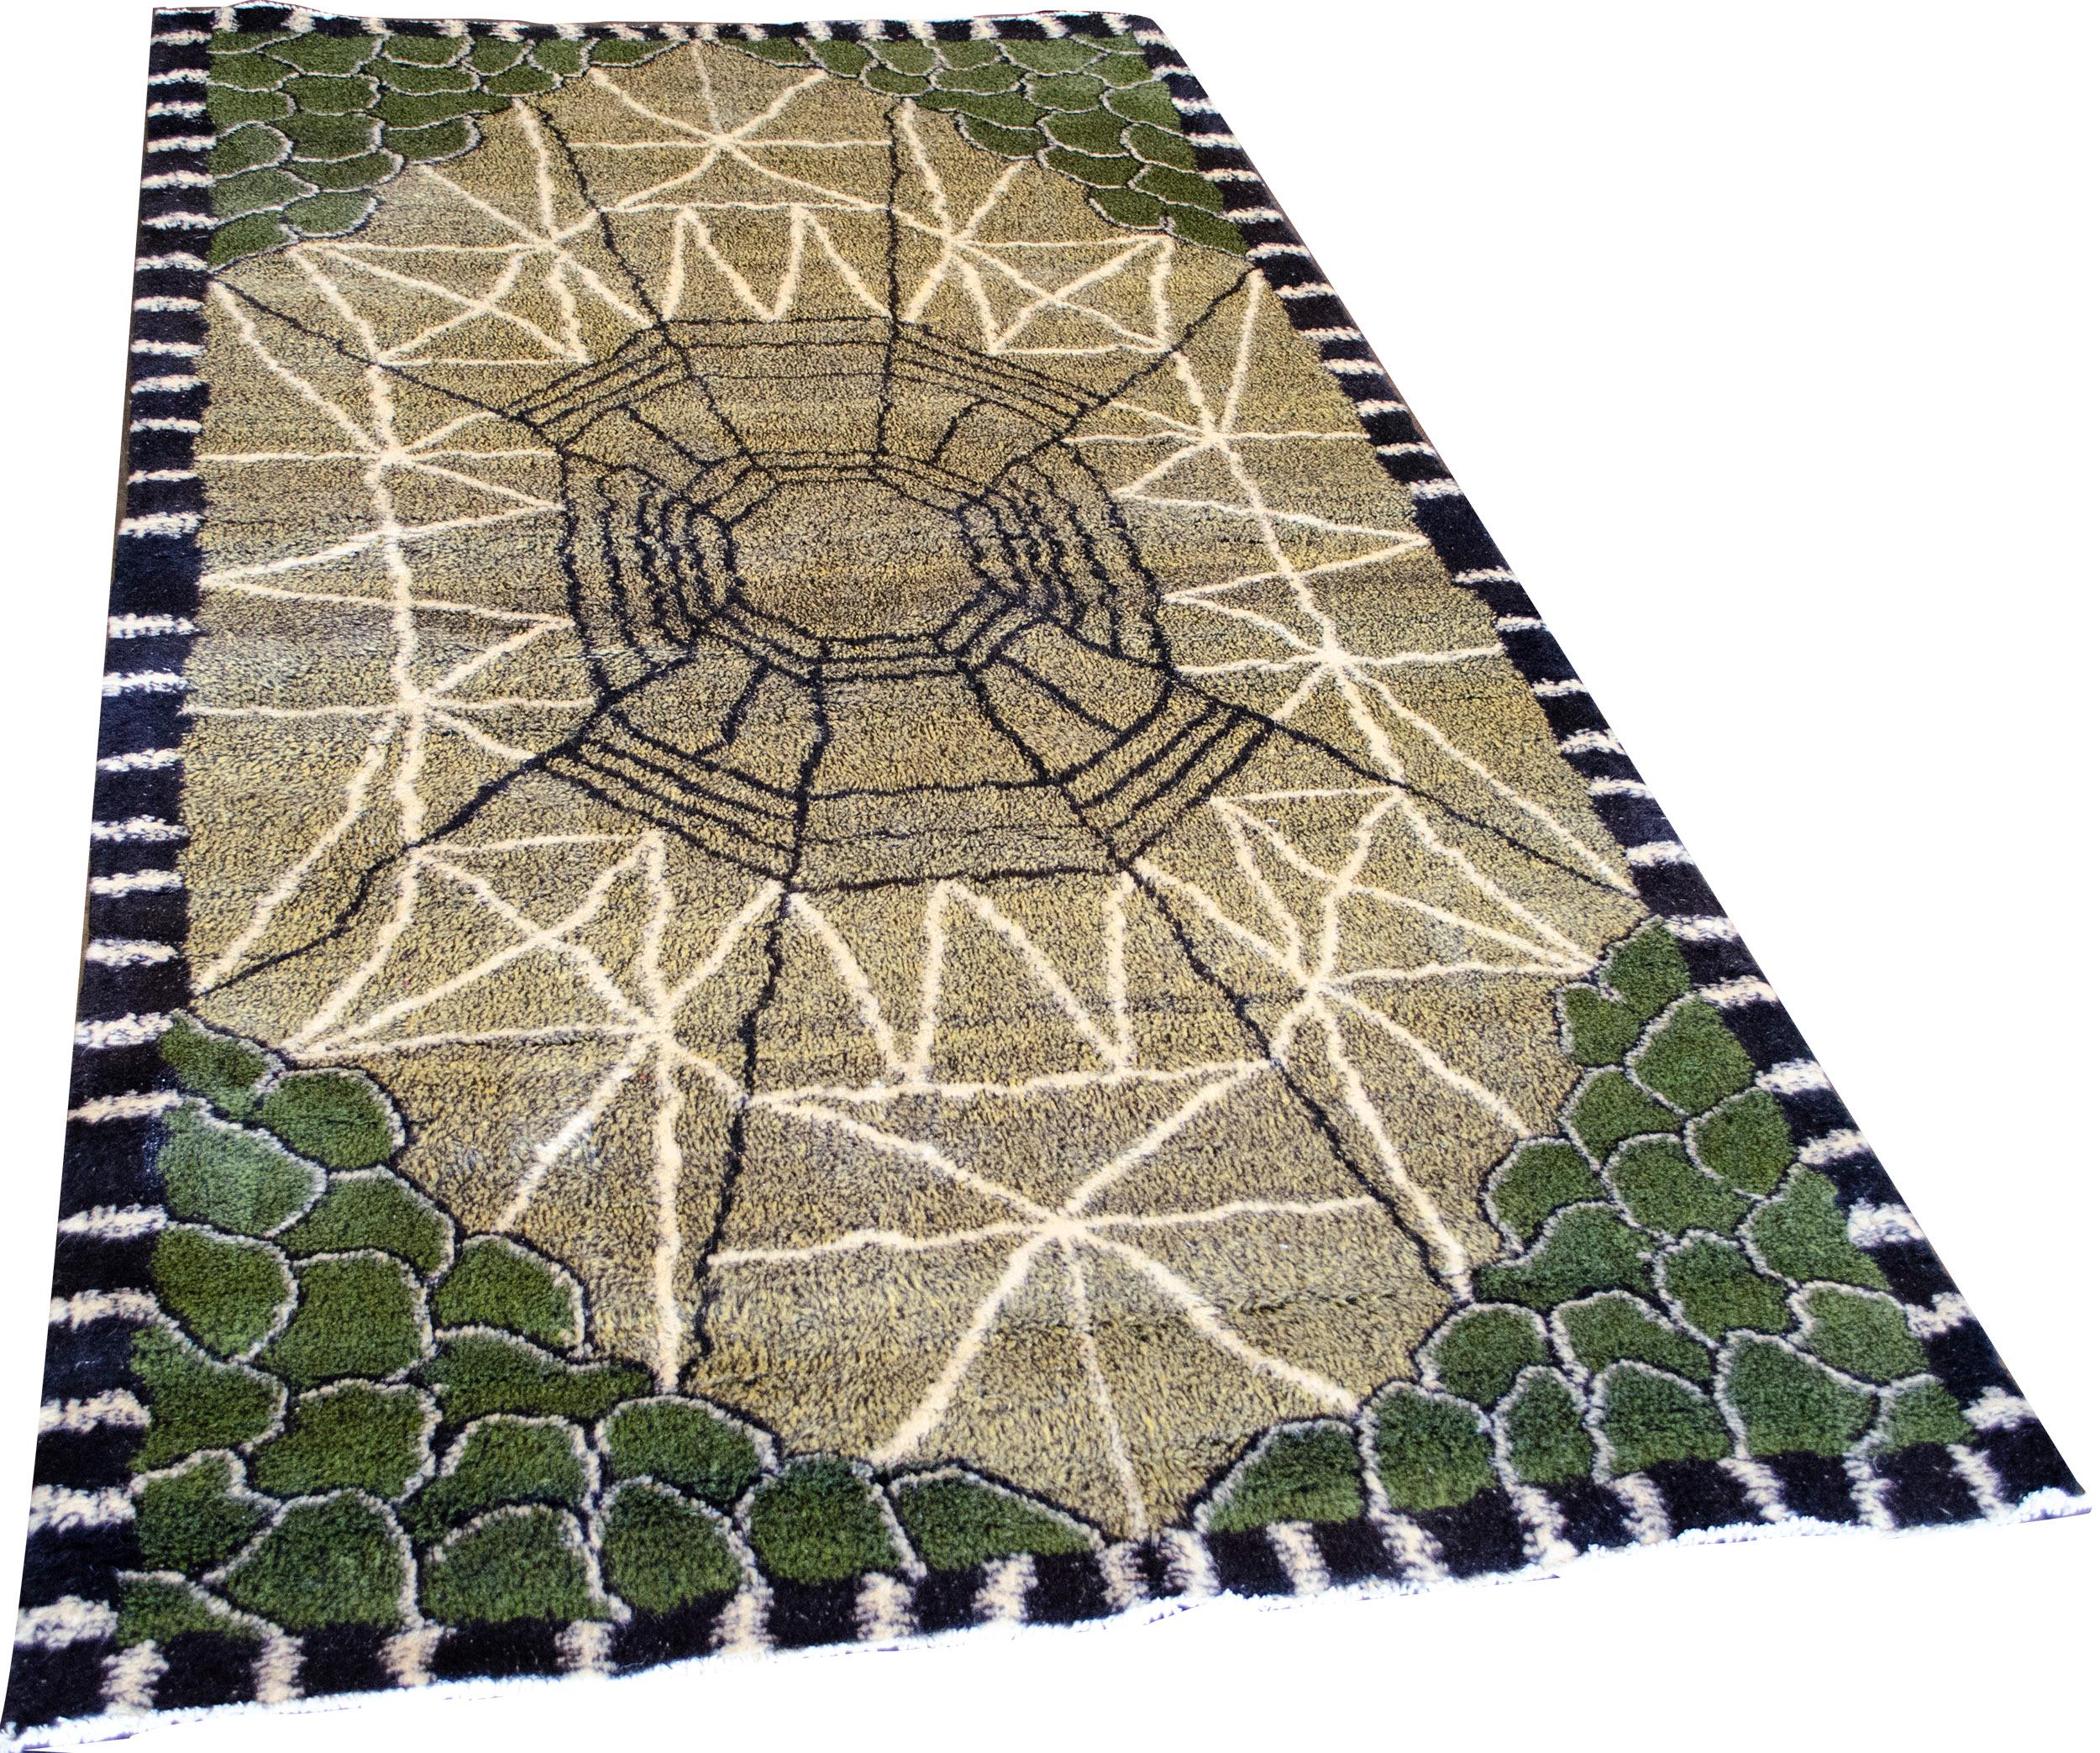 This unique handwoven Turkish deco pile rug has a sandy yellow overall field featuring a pattern reminiscent of an emerald cut gem, olive green pebbled corners, and a black and white perpendicular striped border. 100% wool.